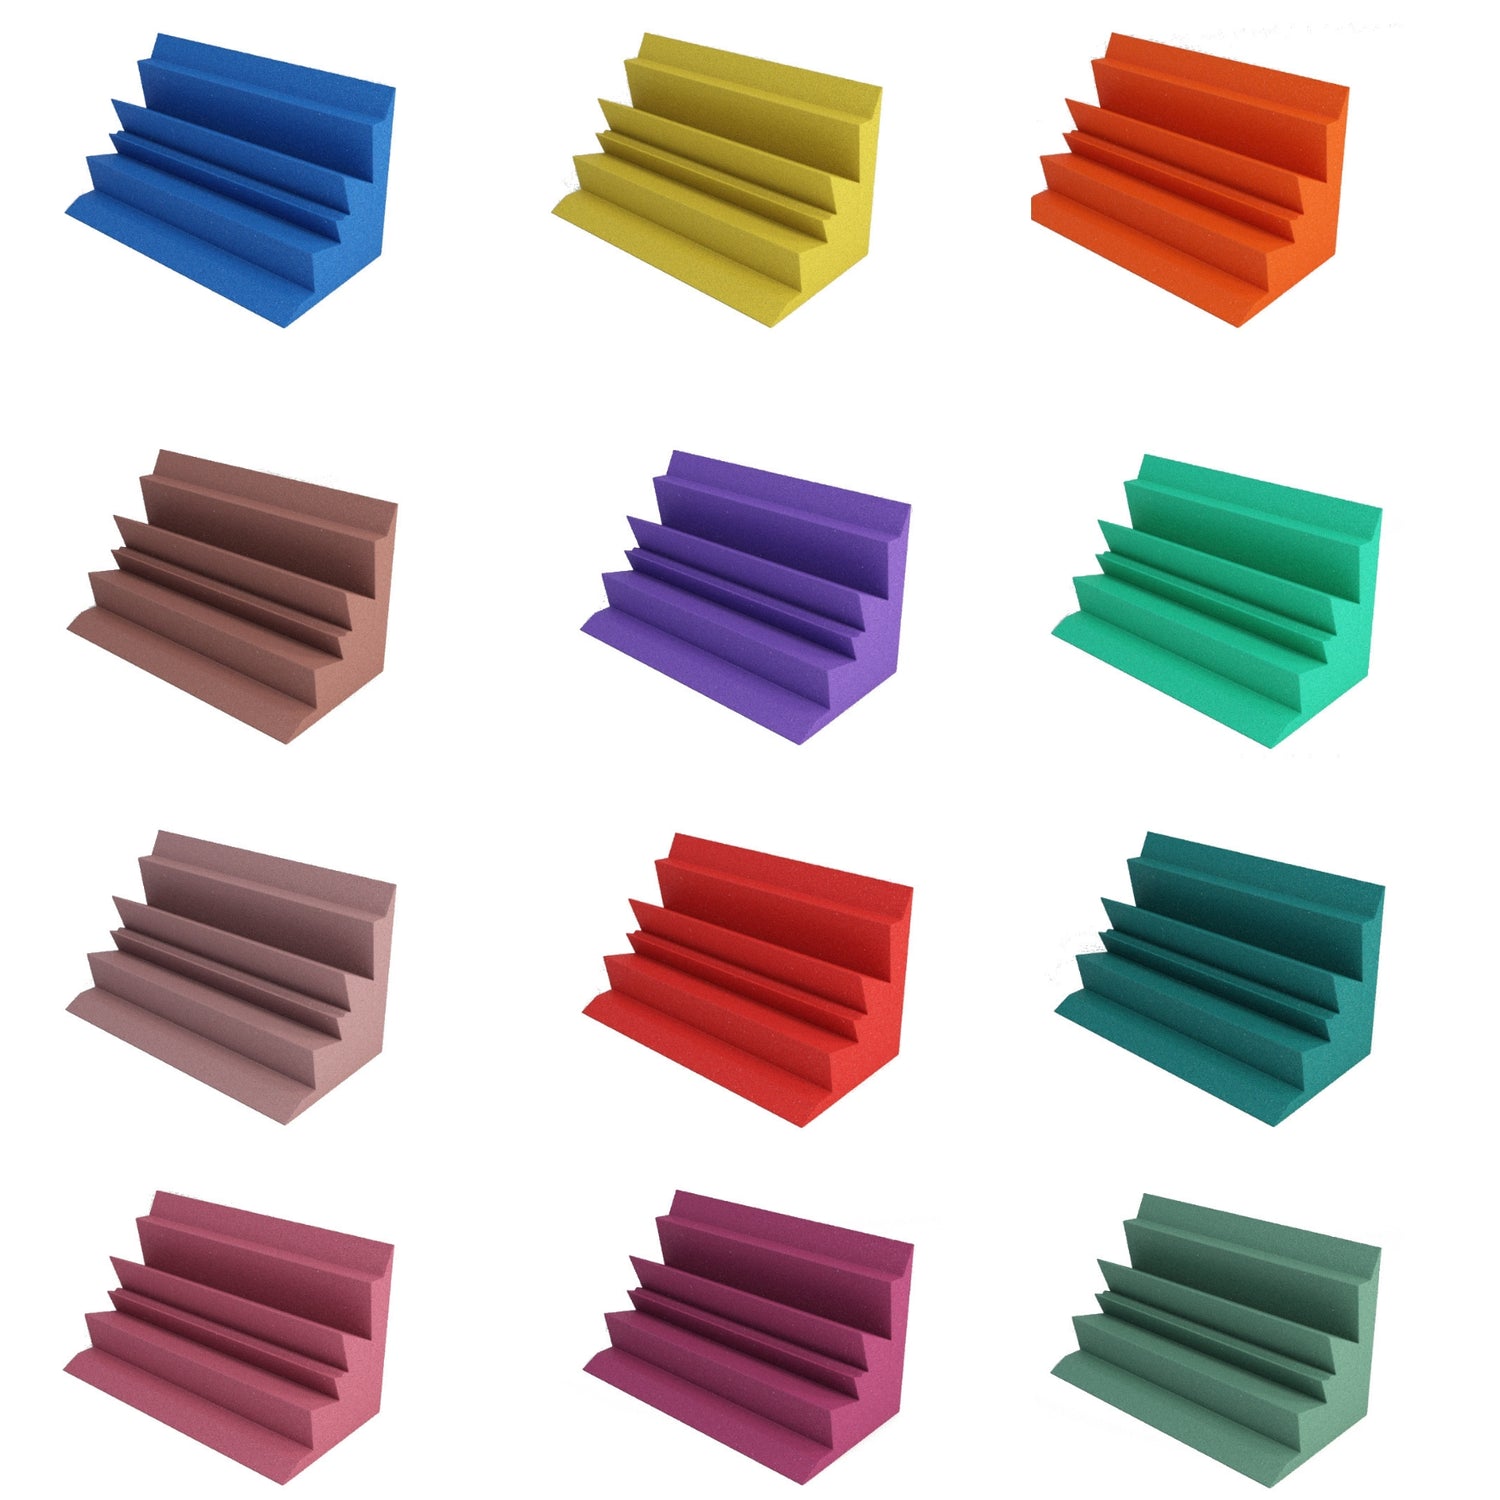 acoustic foam bass traps 12 different colors, blue, yellow, orange, brown, purple, kelly green, rosy beige, red, teal, burgundy, plum, forest green